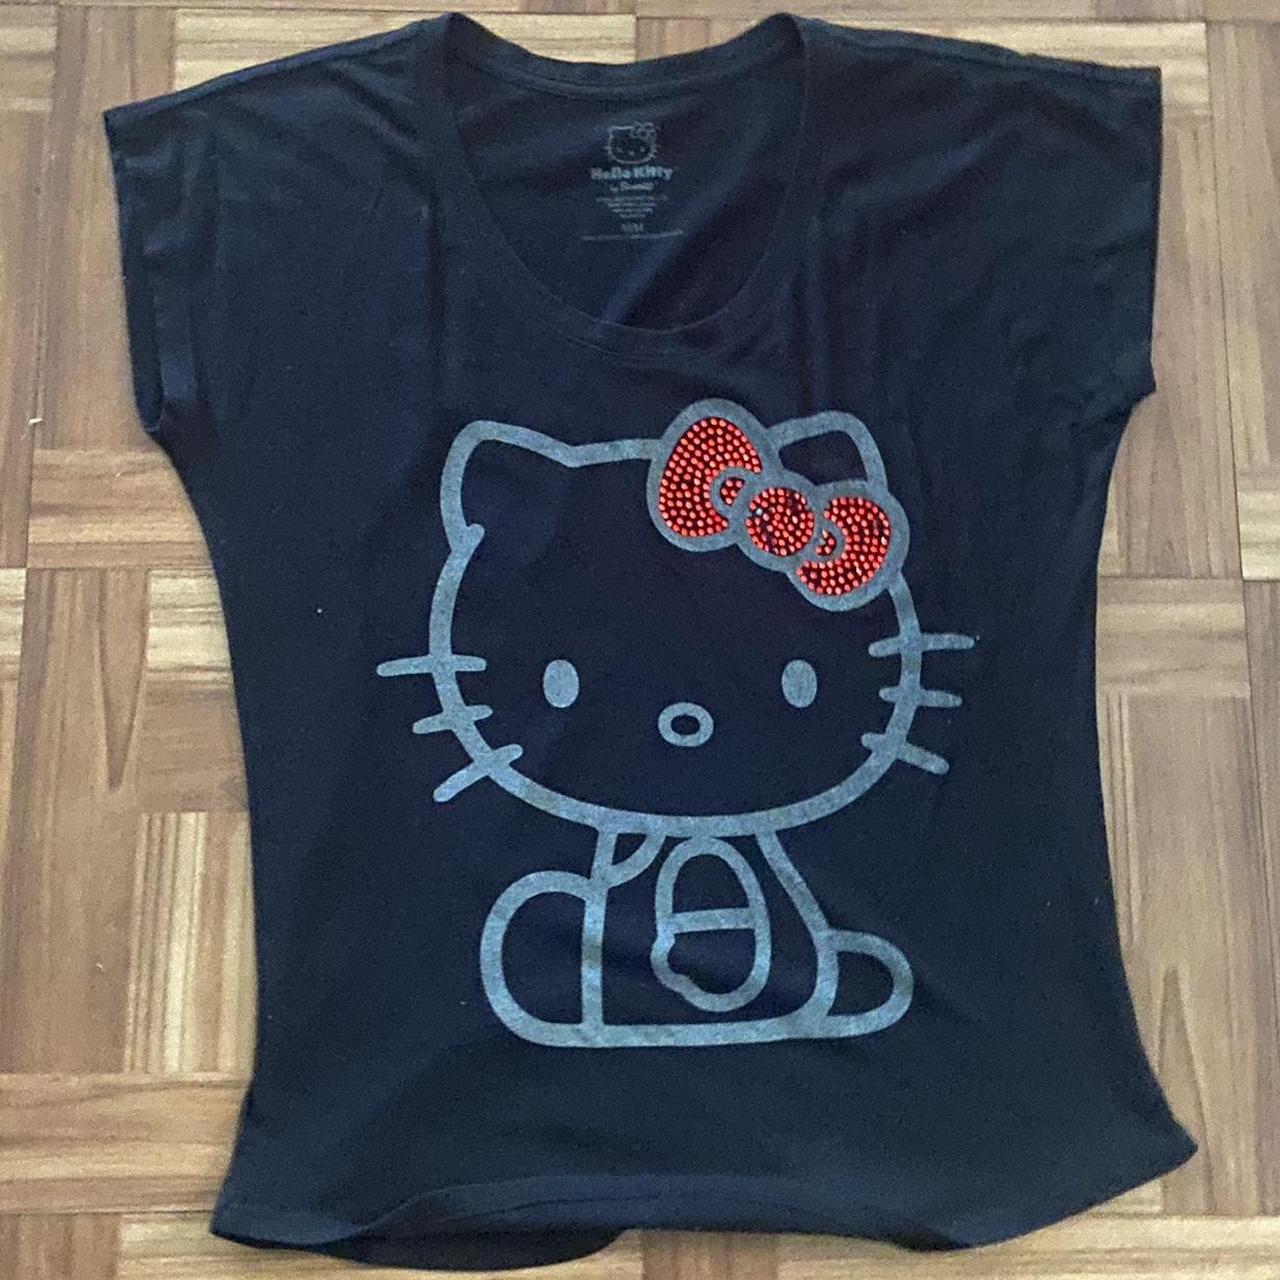 Hello Kitty Women's Black and Red T-shirt | Depop